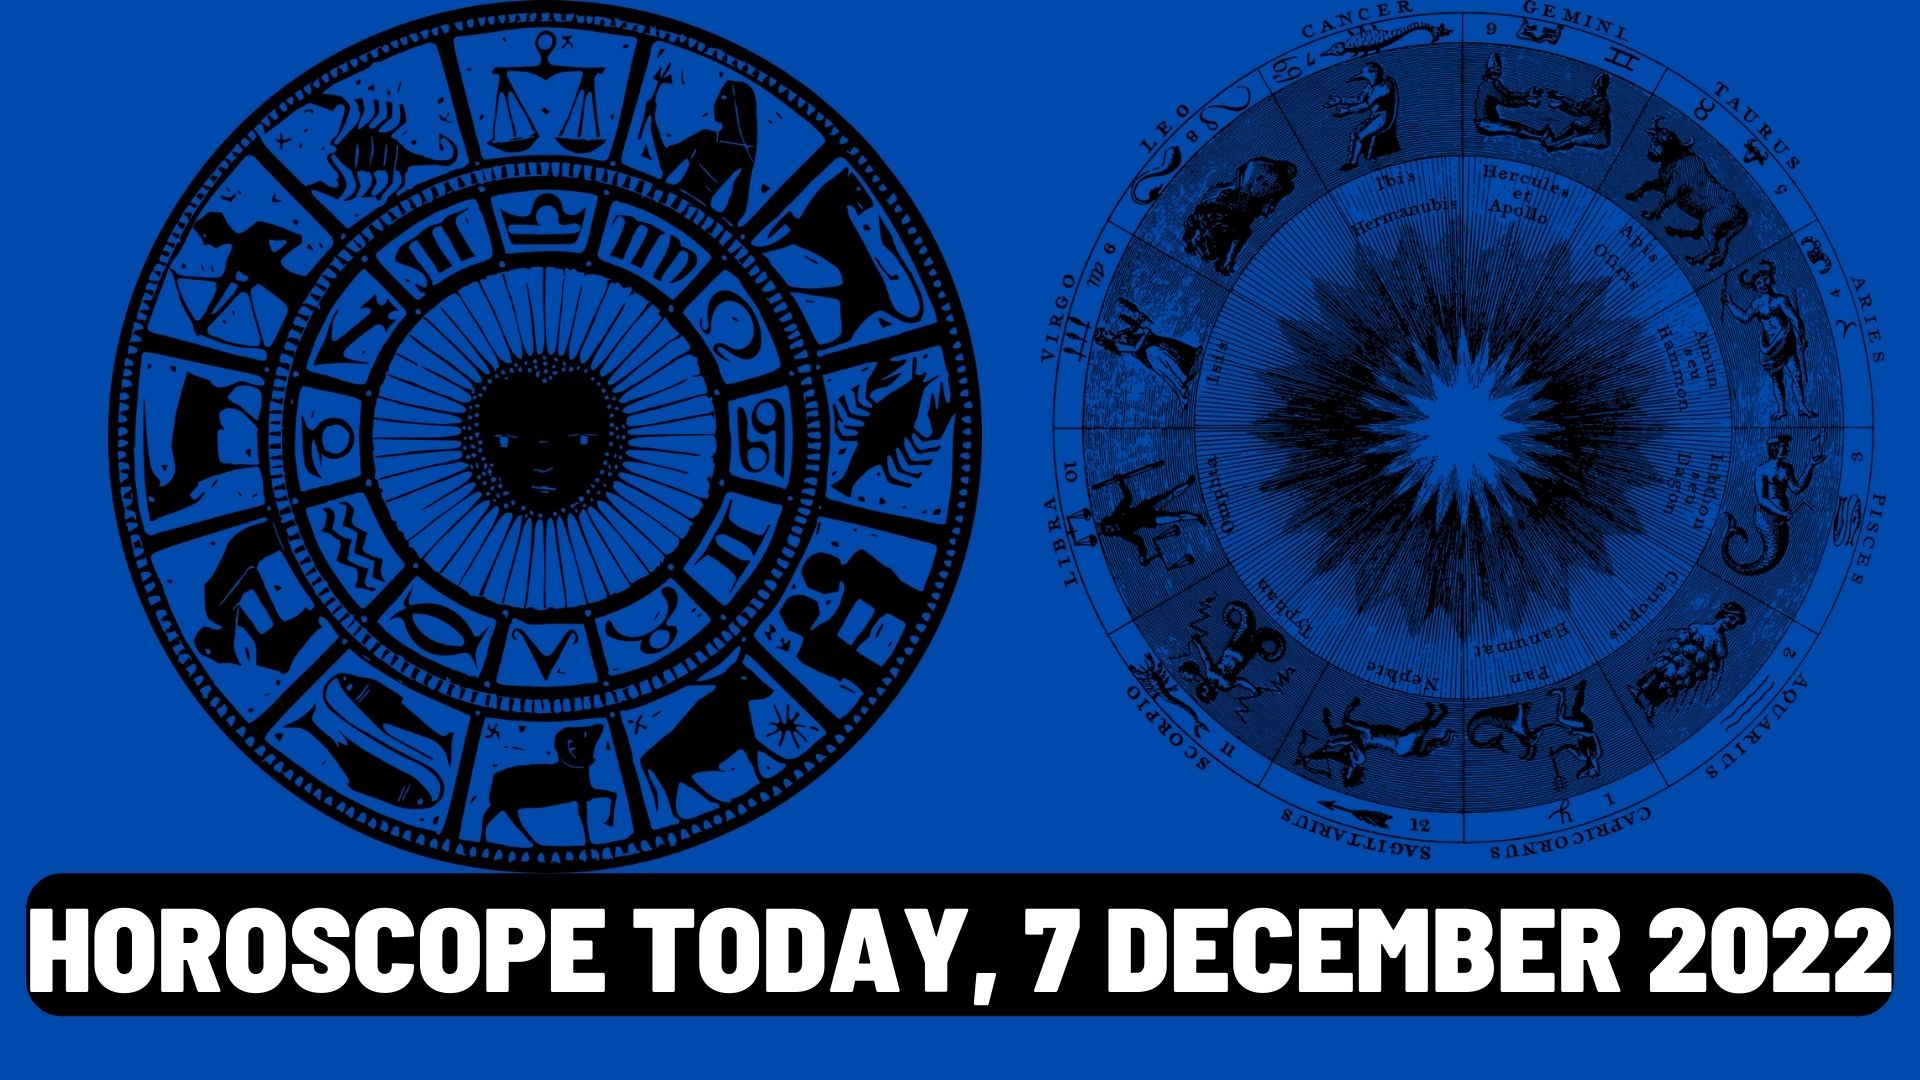 Horoscope Today, 7 December 2022 - Check Astrological Prediction Of Your Zodiac Sign